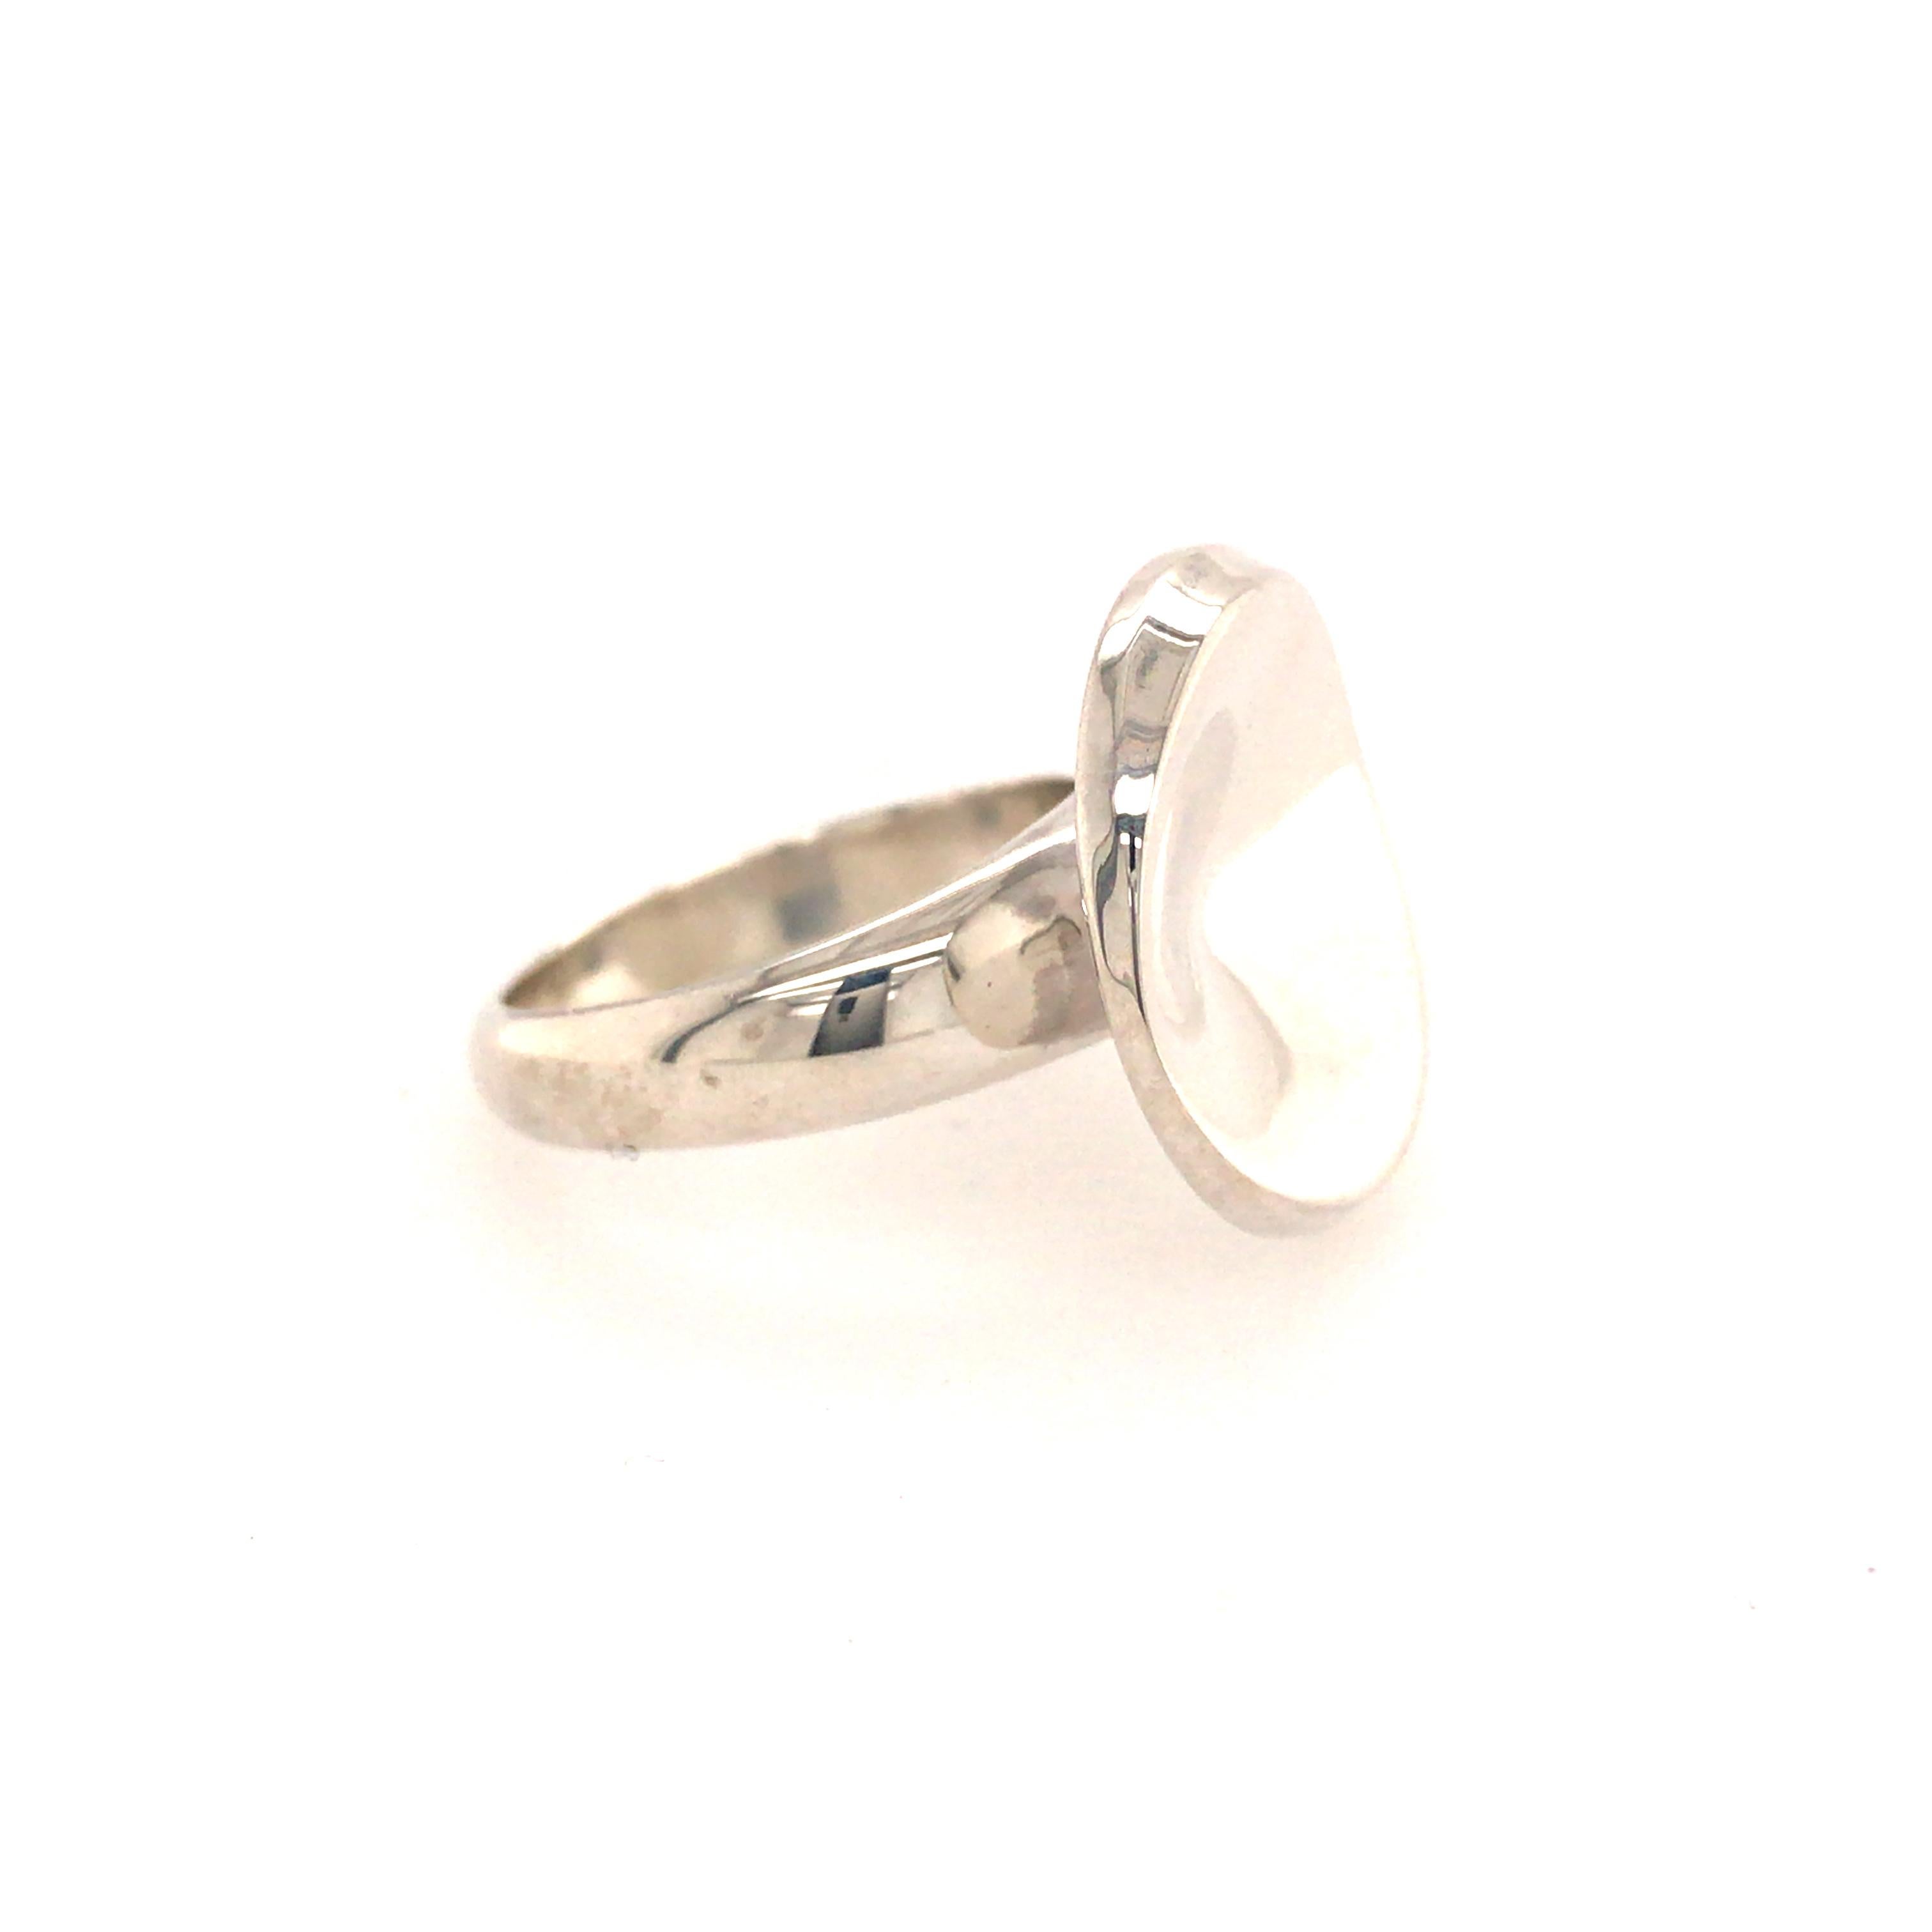 George Jensen Silver Ring with Round Top For Sale 3